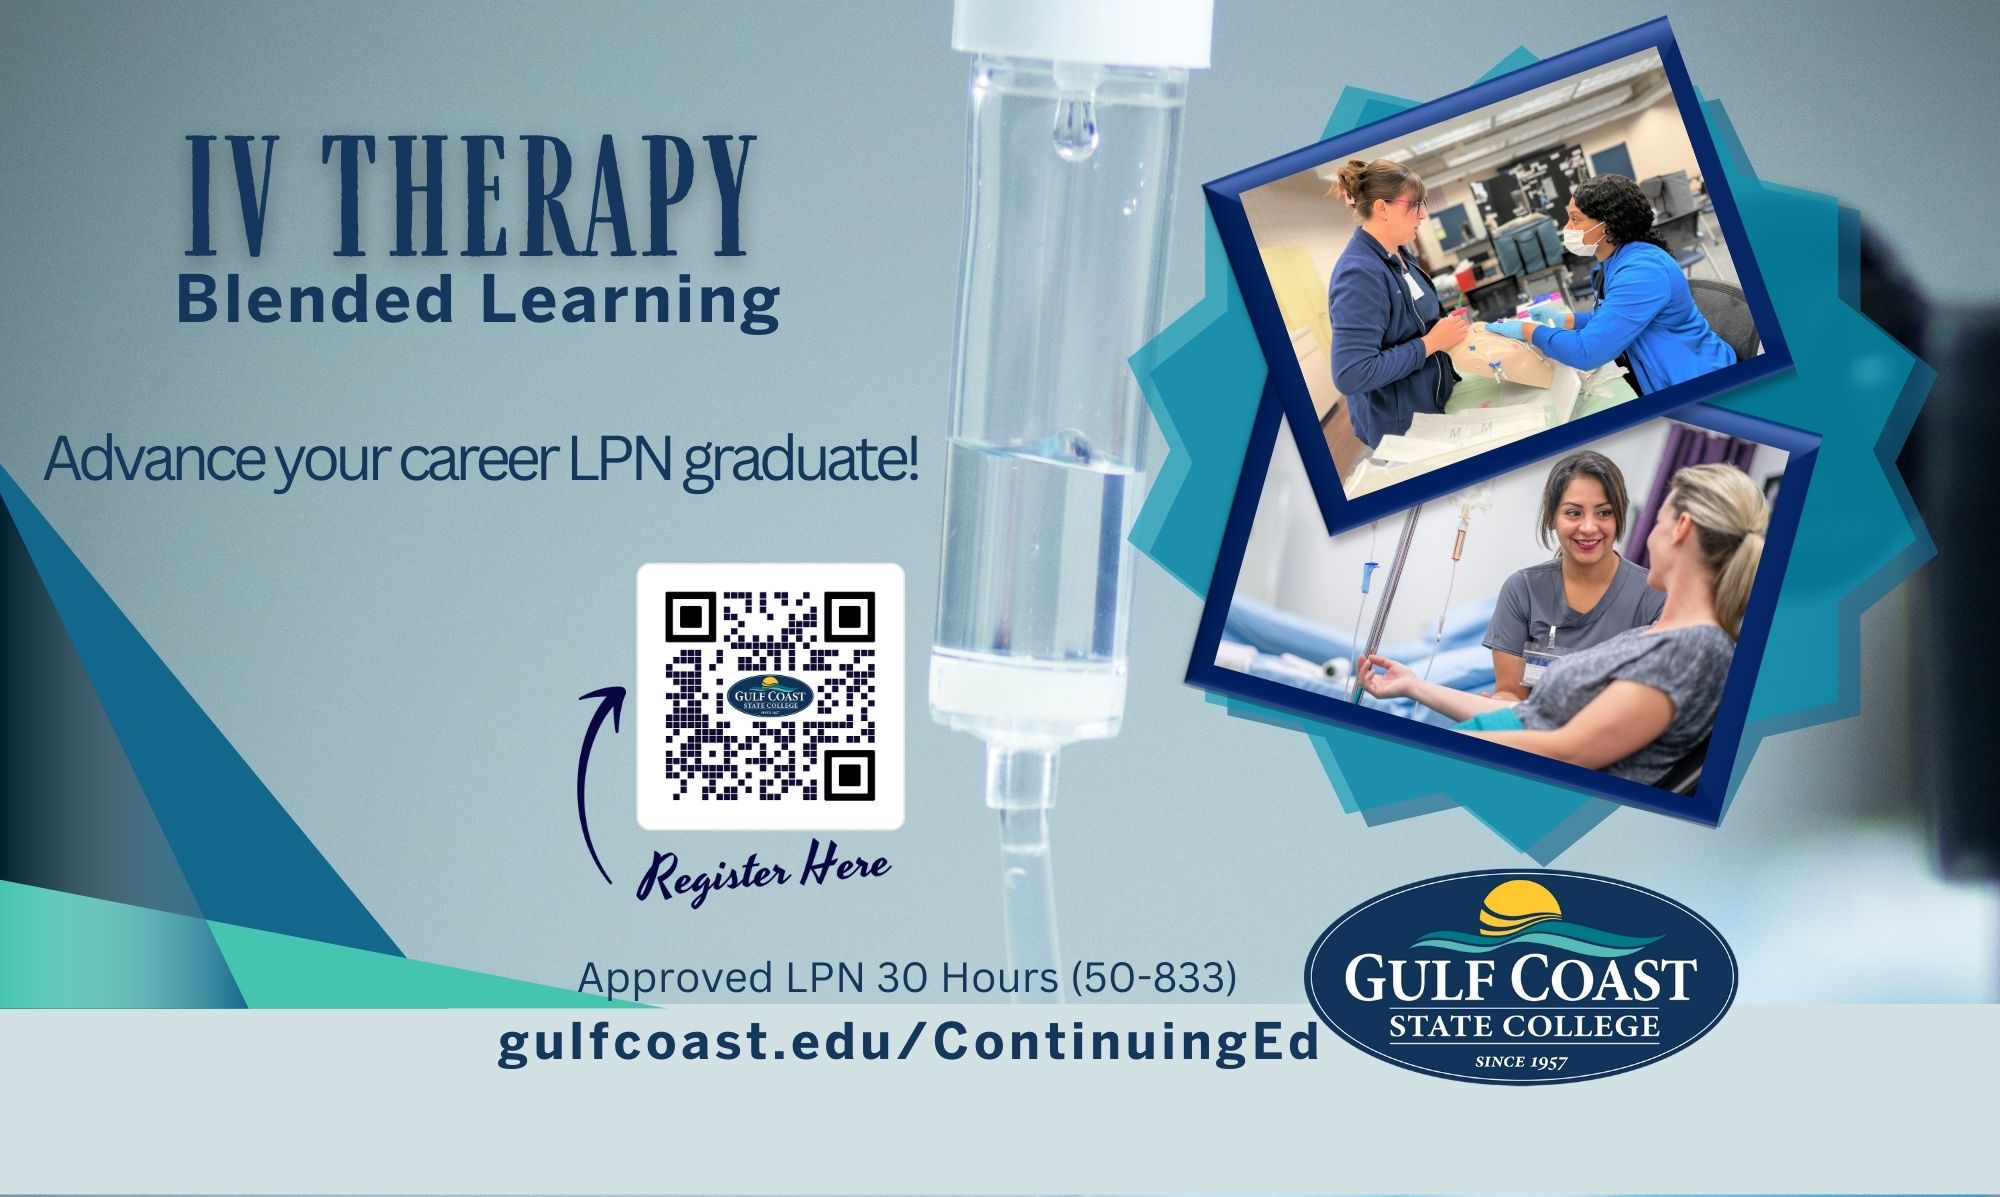 IV Therapy Blended Learning